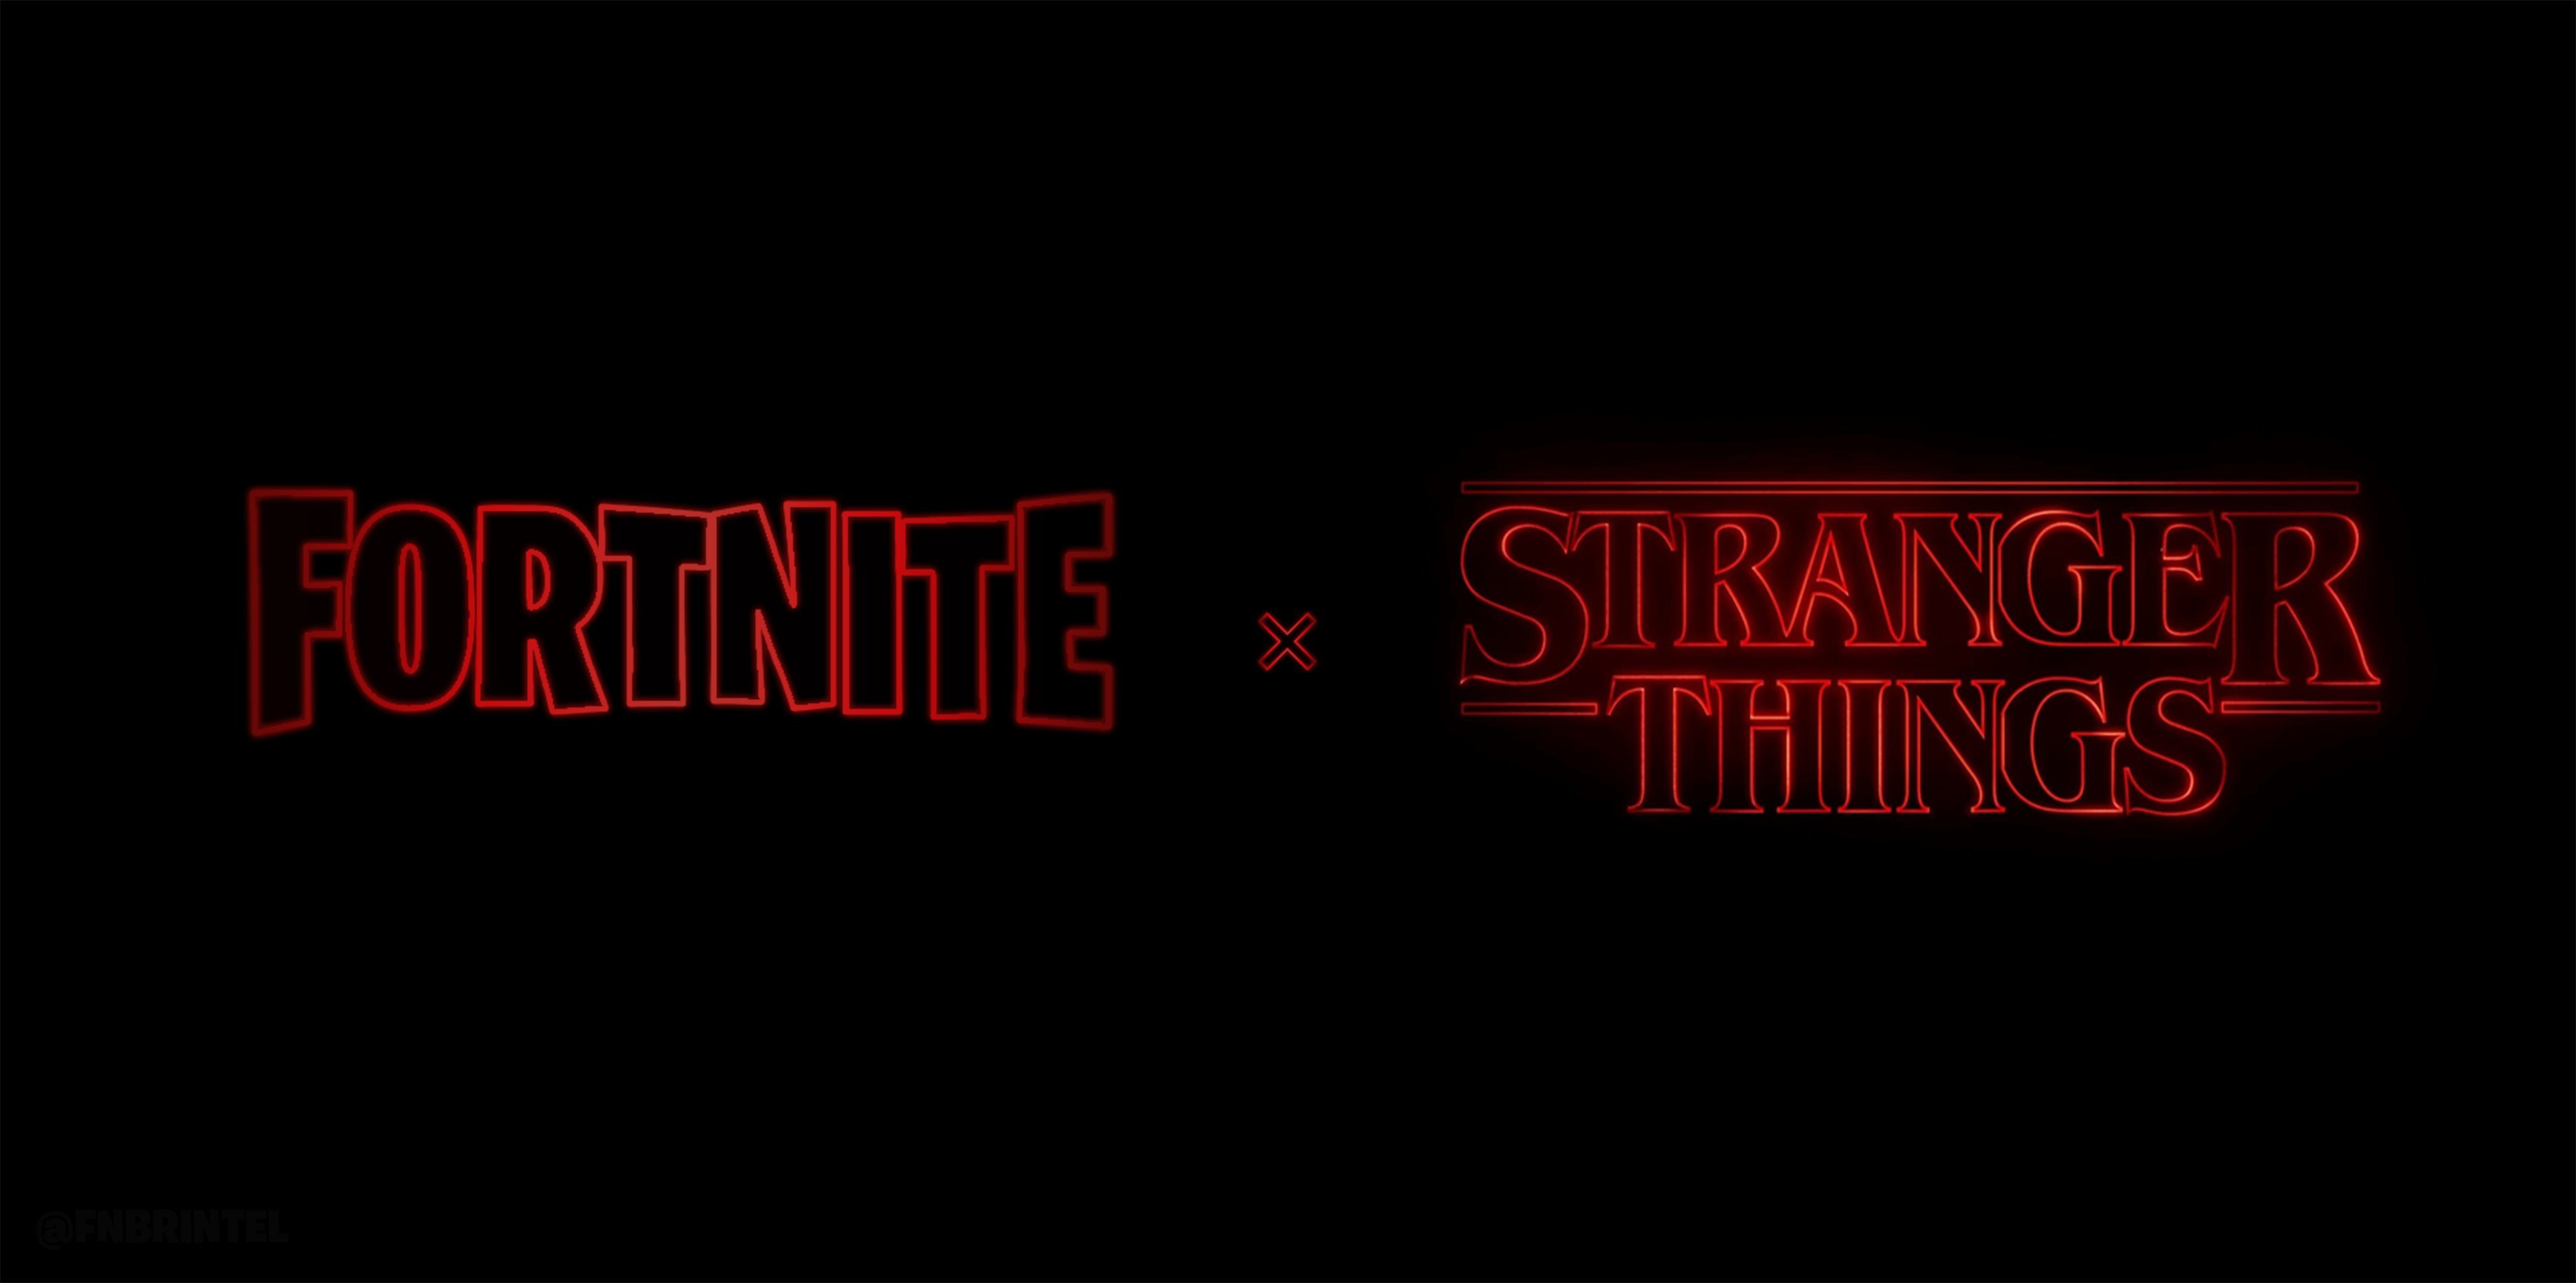 Fortnite x Stranger Things: New leaks suggest Eleven might soon be a skin in Fortnite